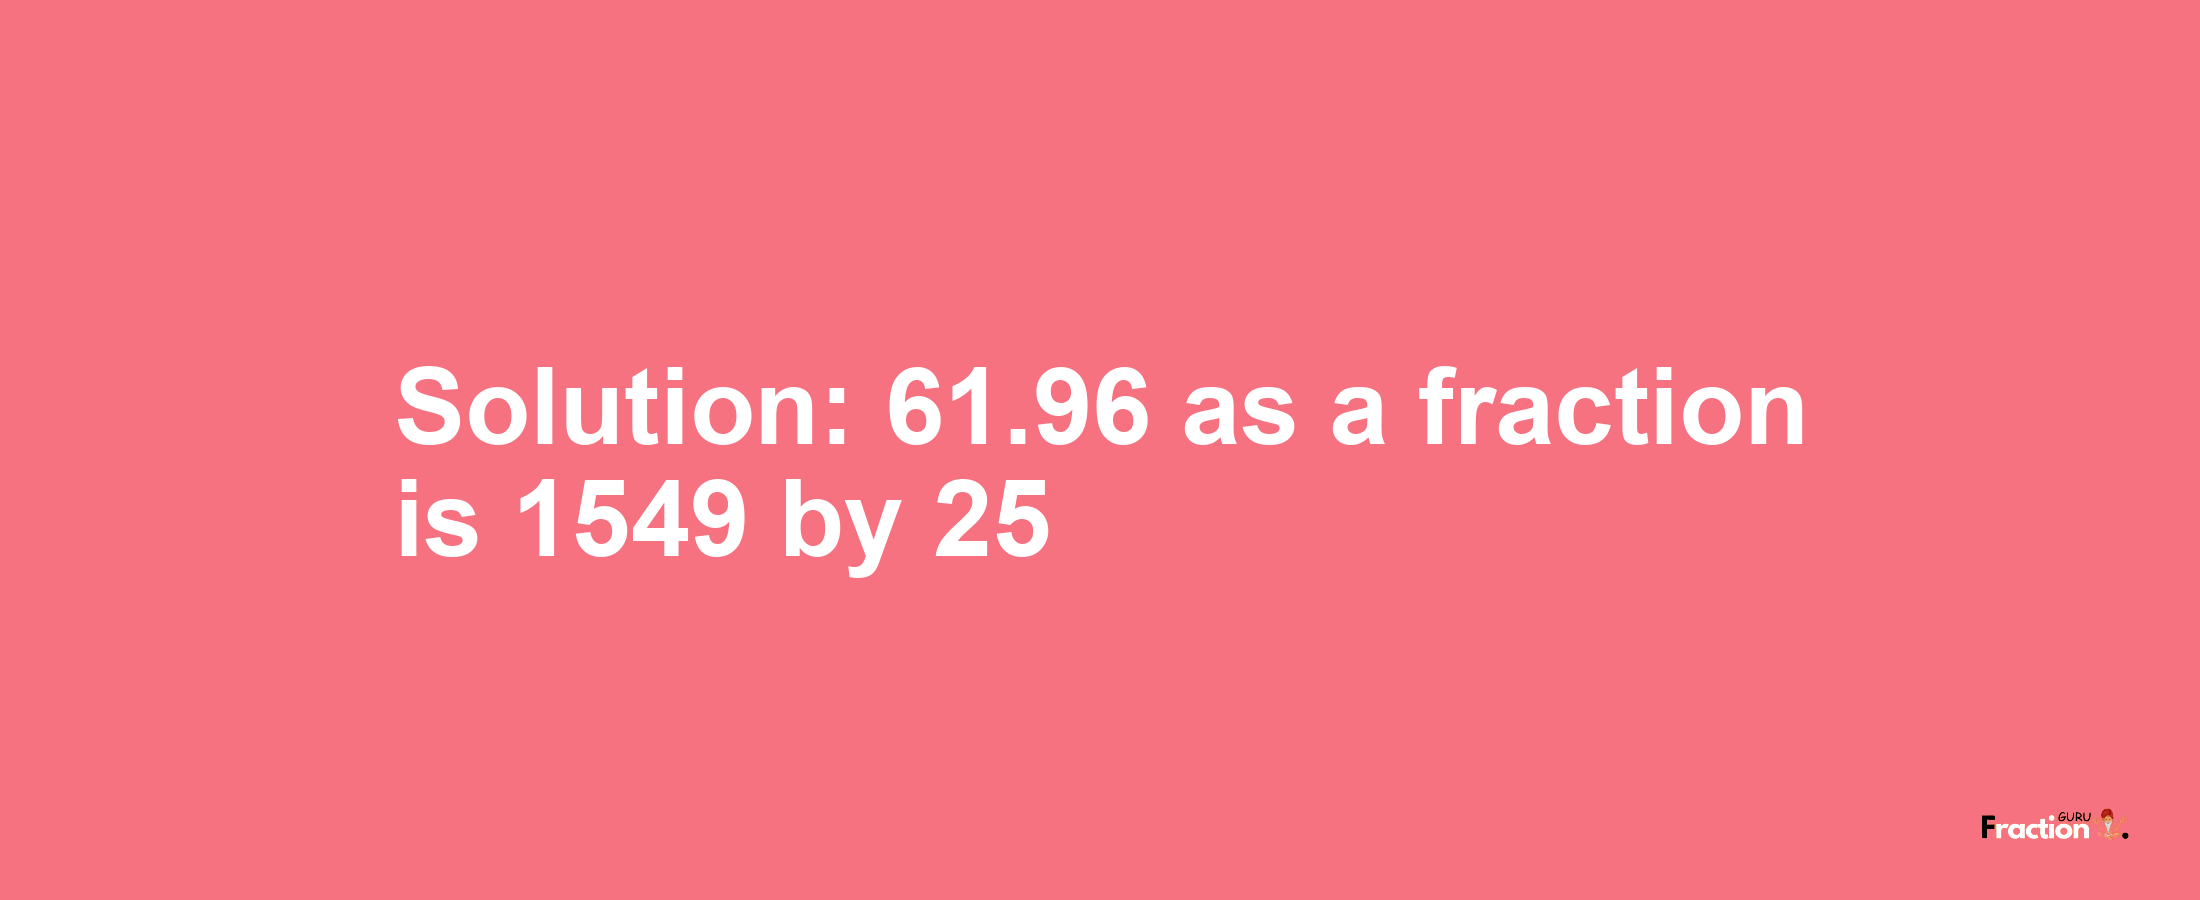 Solution:61.96 as a fraction is 1549/25